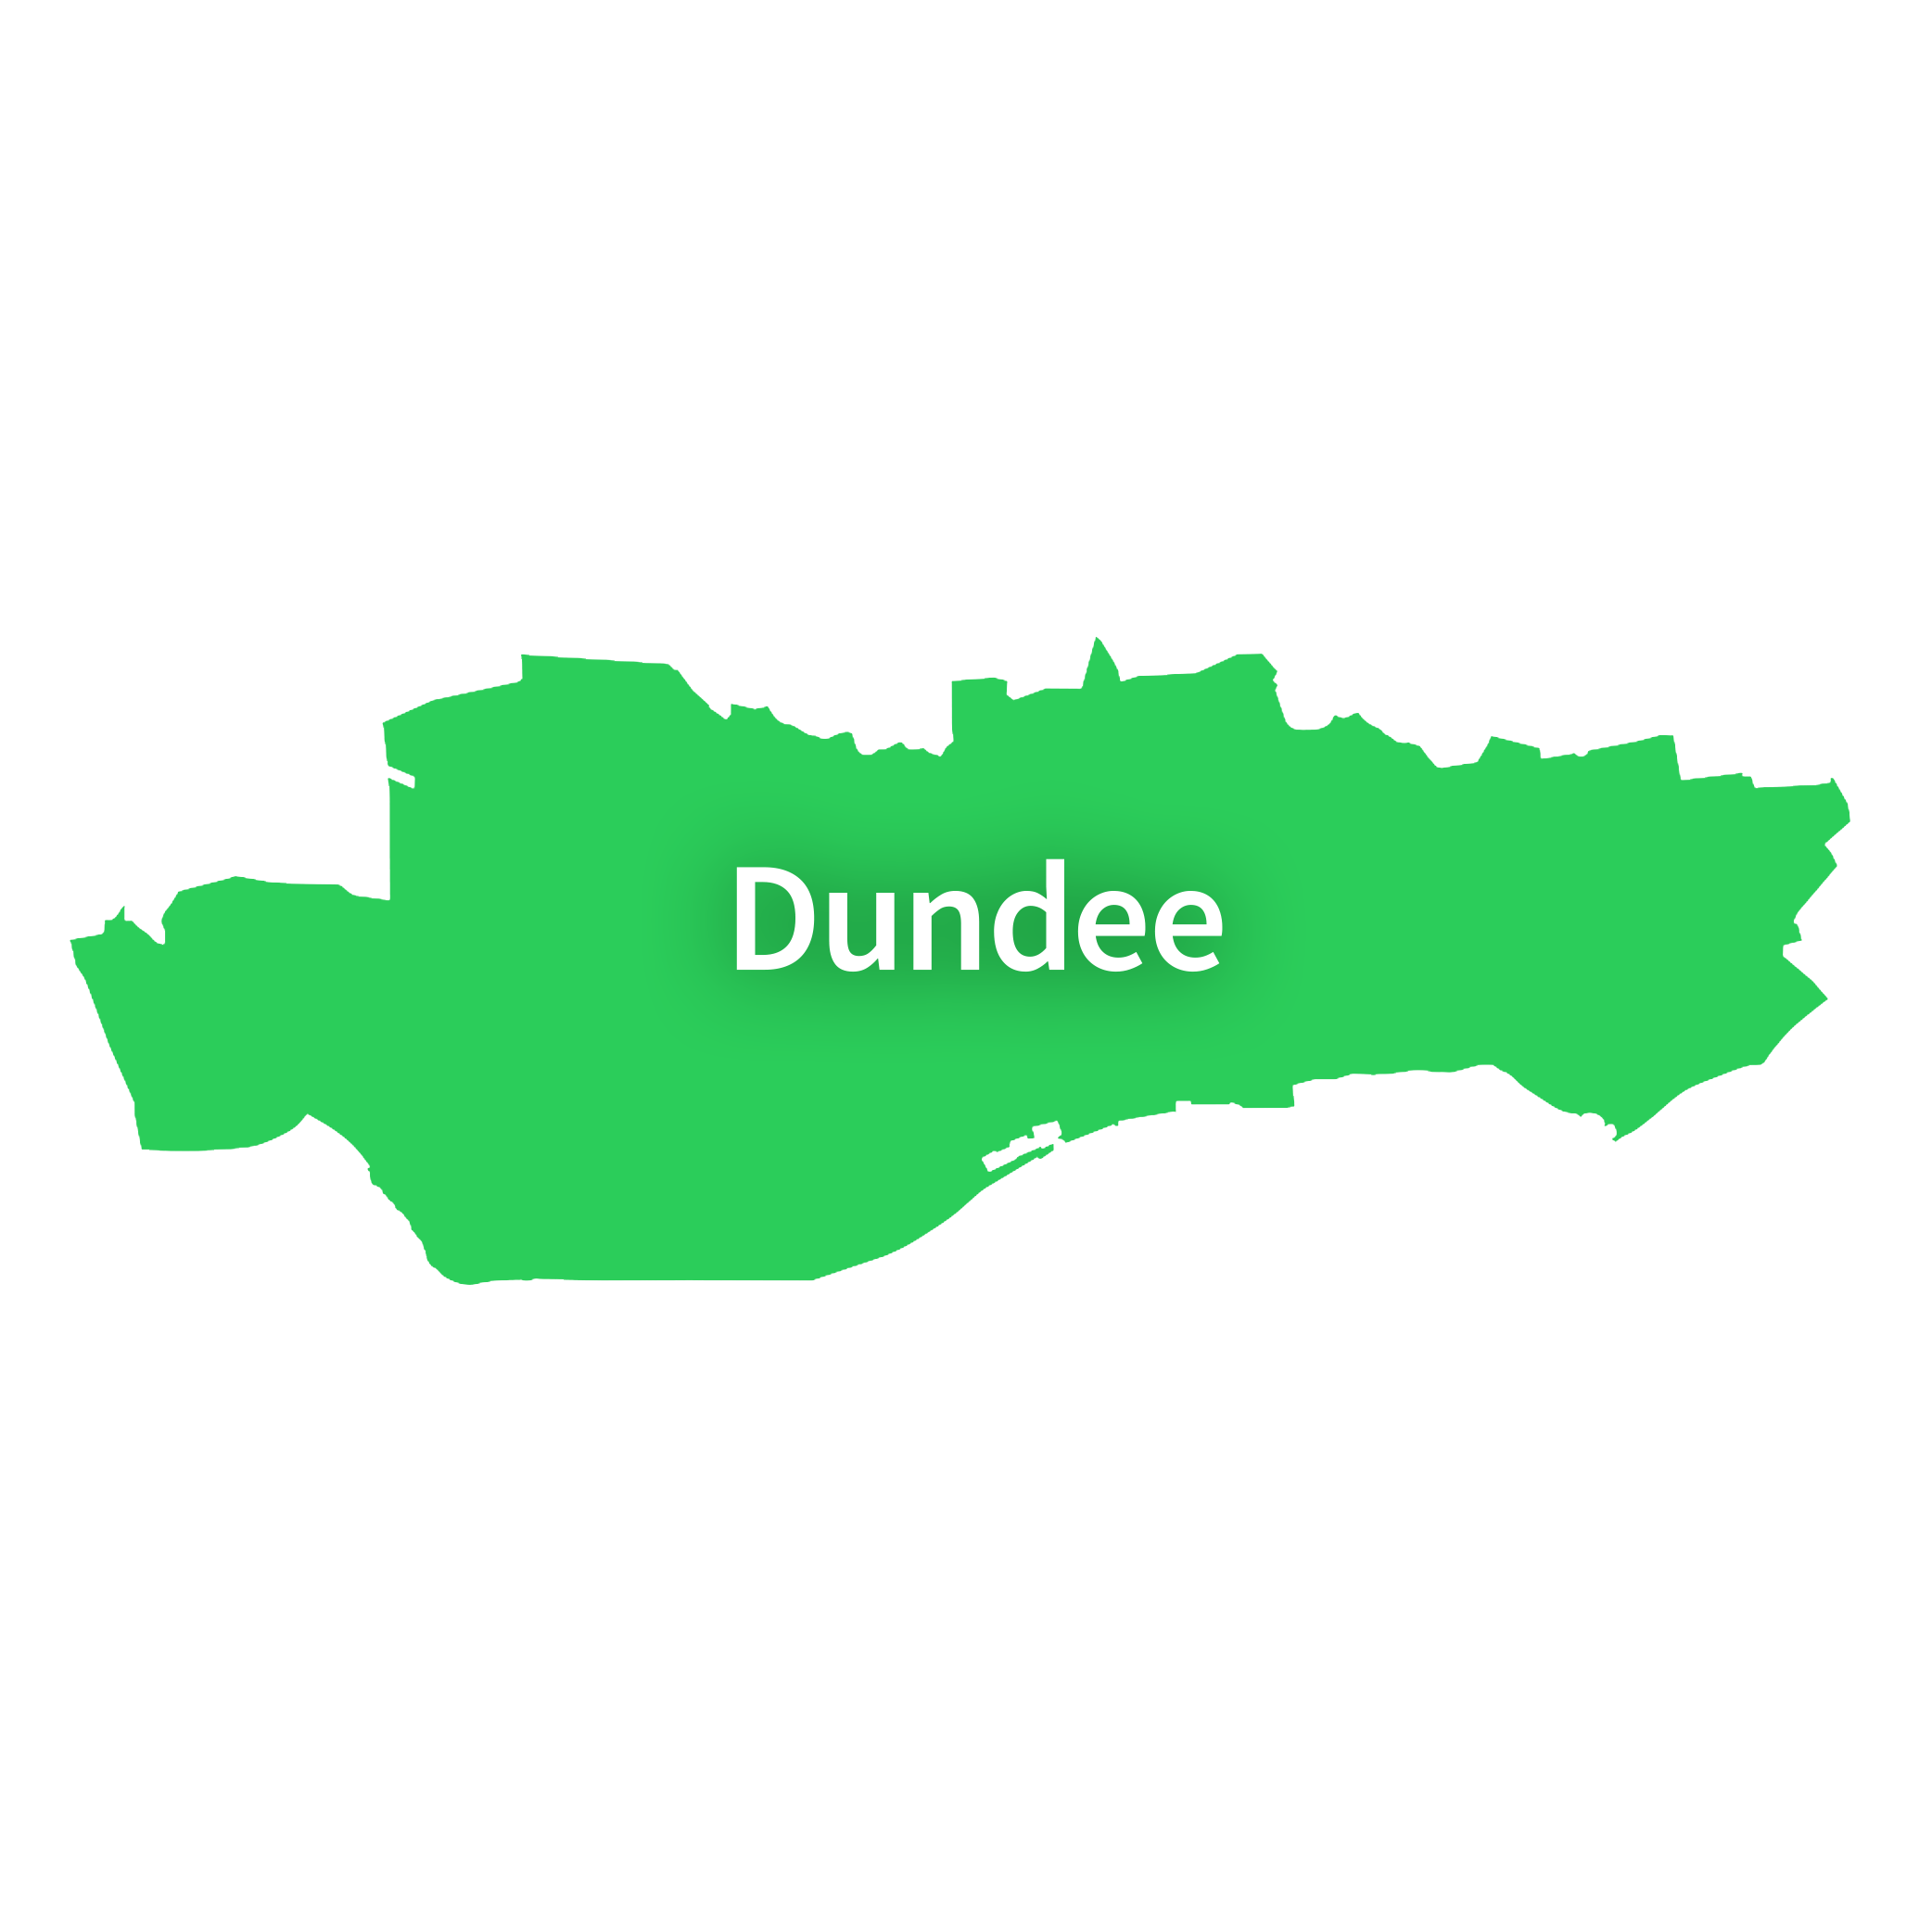 Map of Dundee